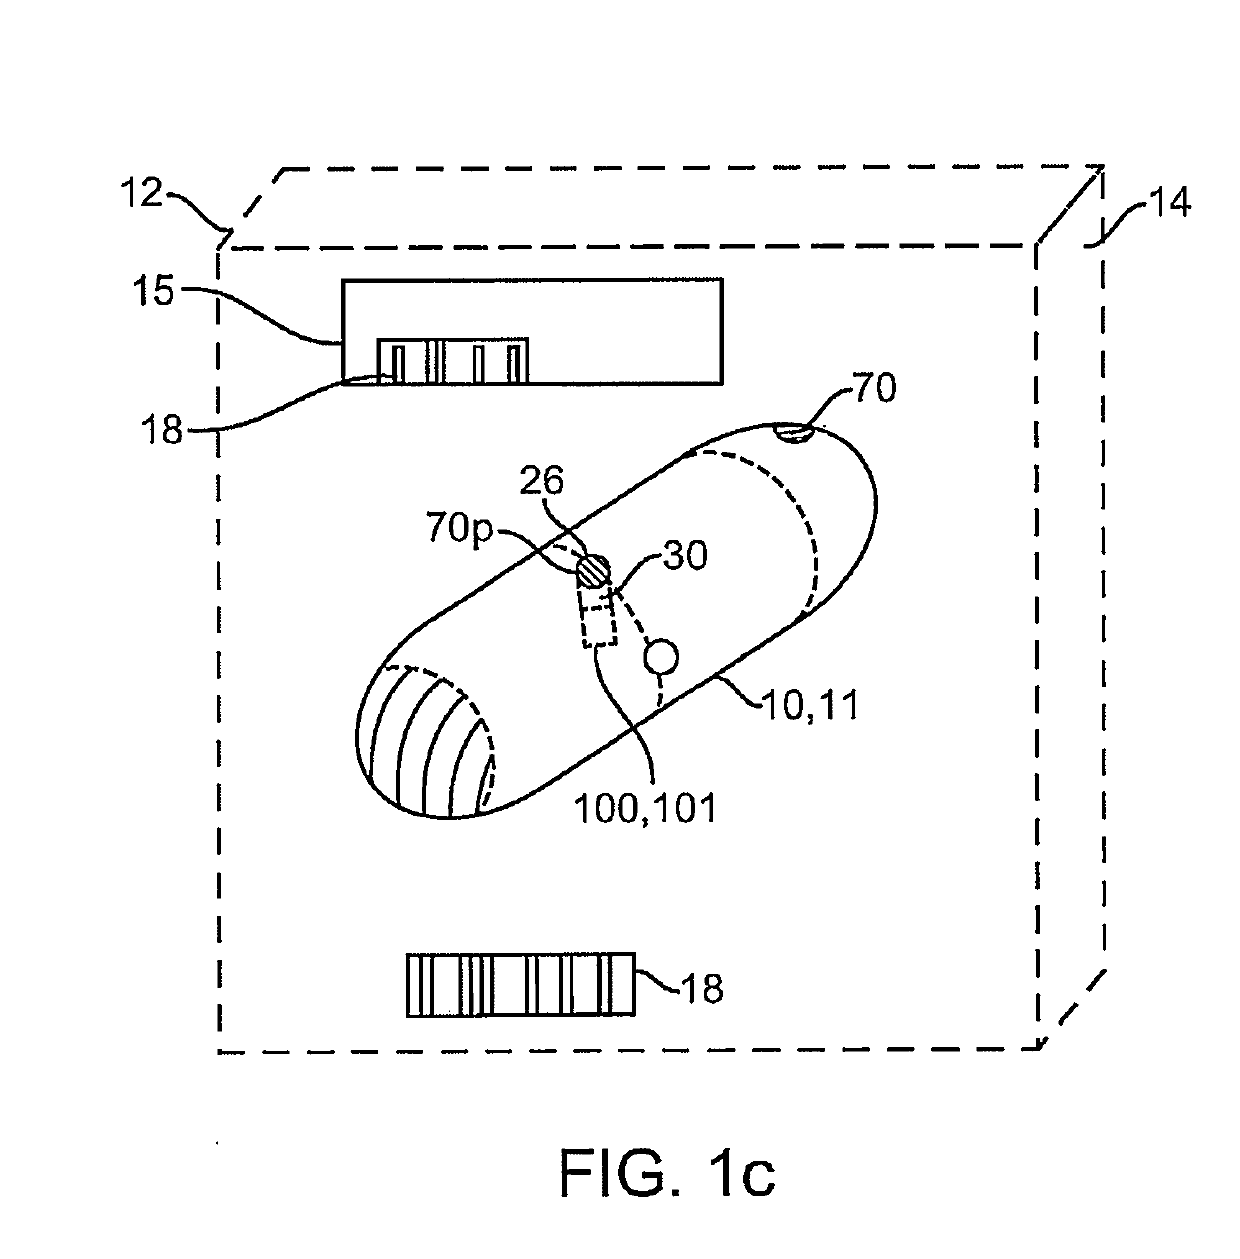 Clotting factor preparations for delivery into tissue of the intestinal tract using a swallowable drug delivery device